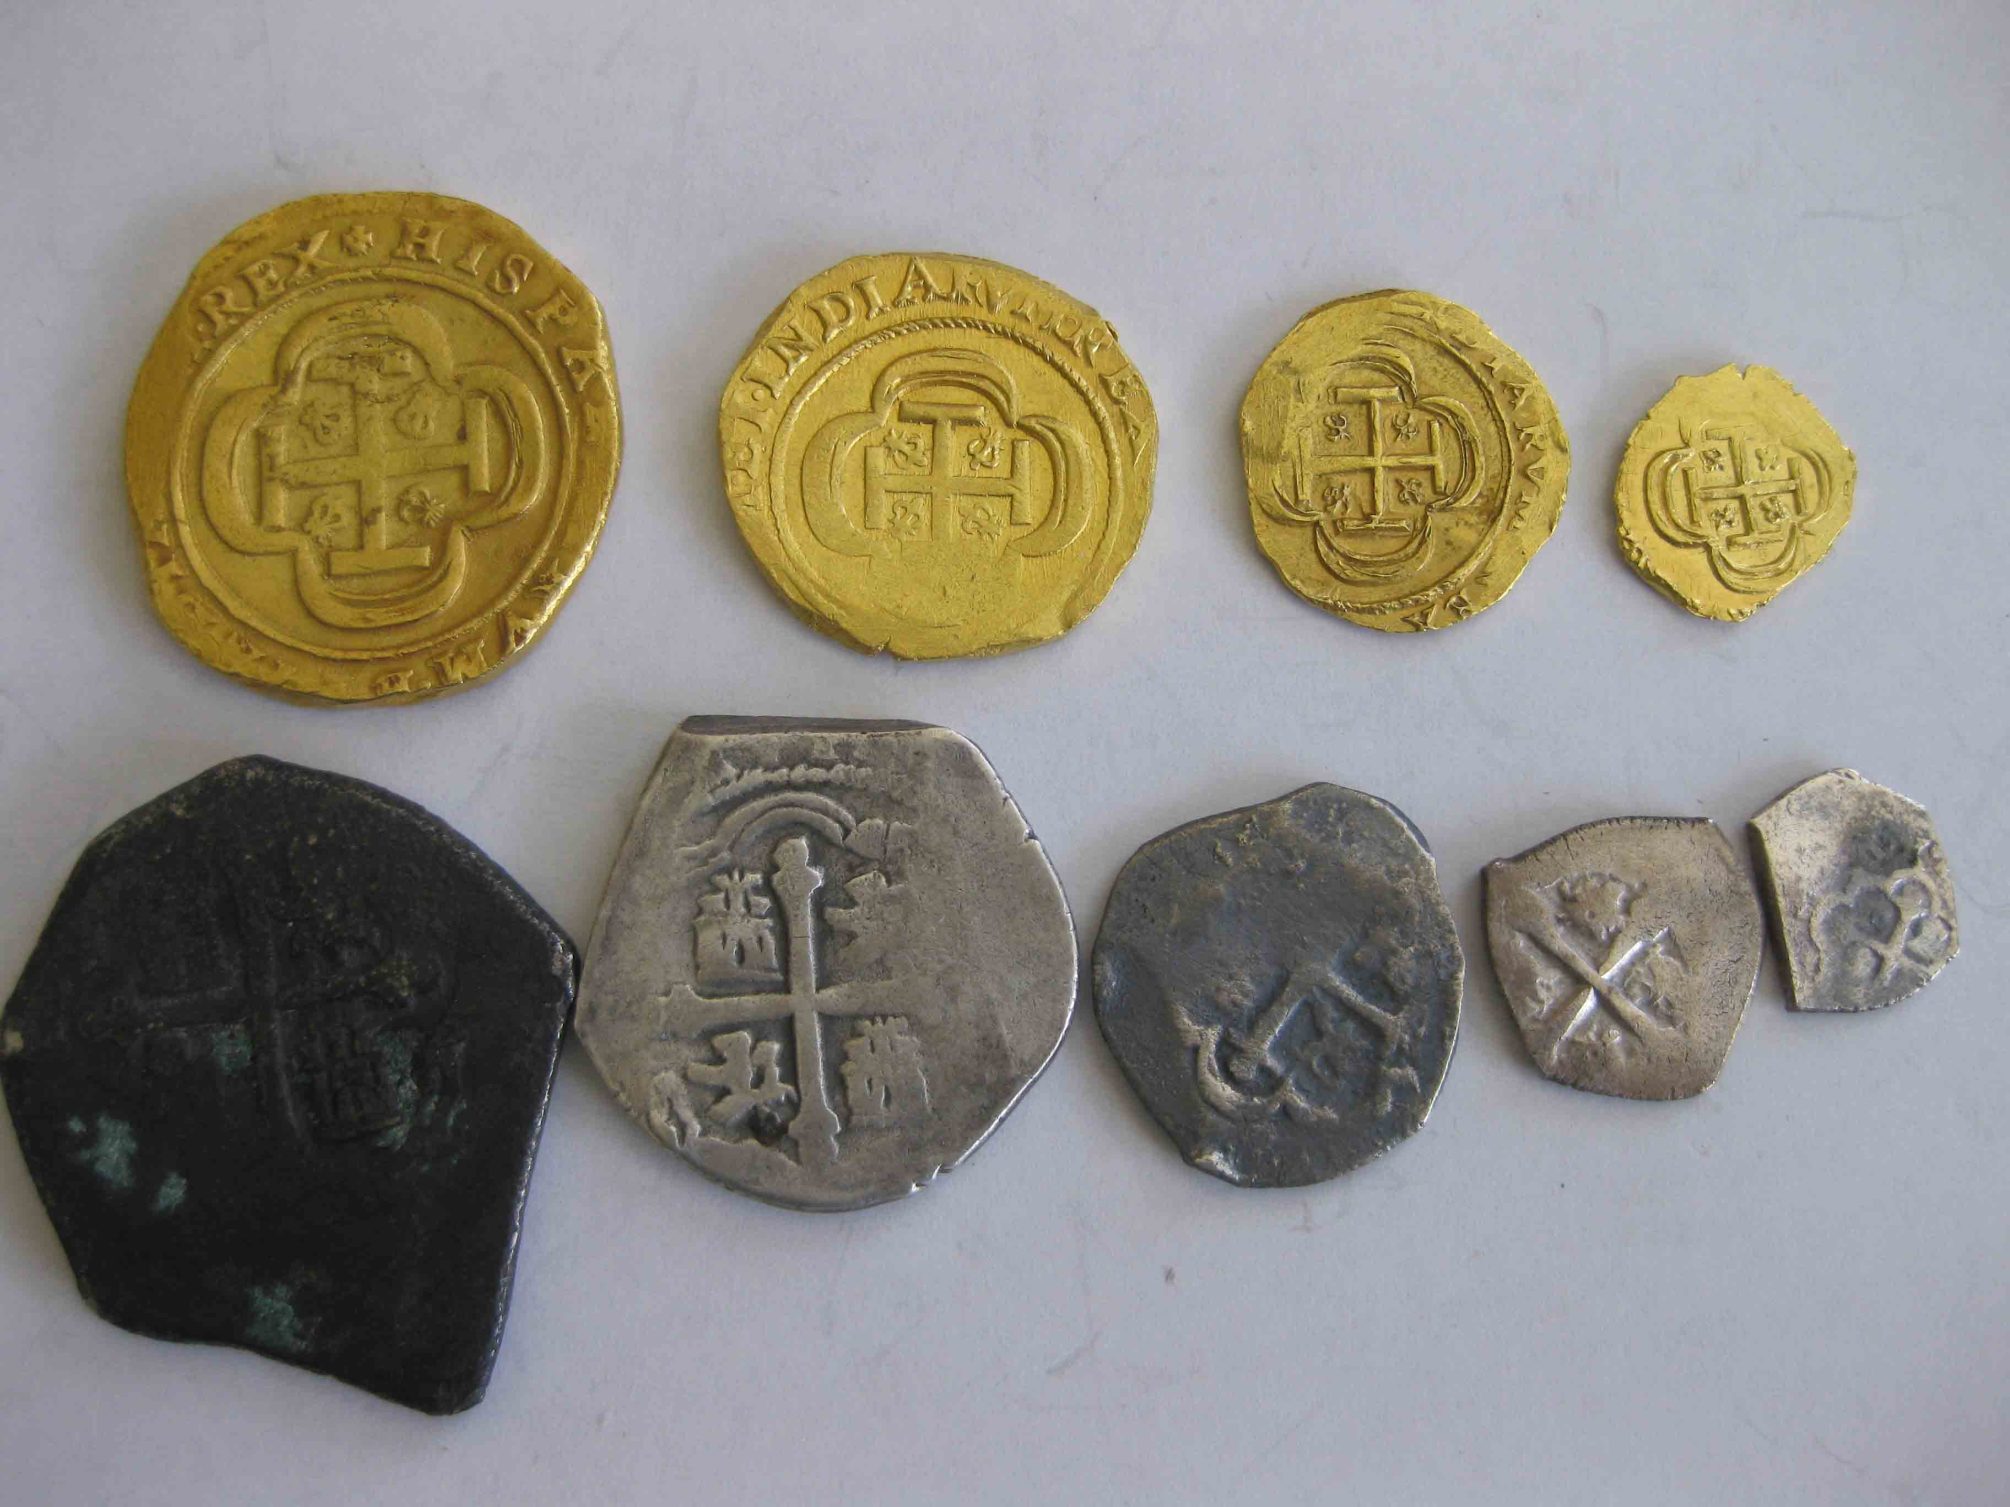 Mexico 1714 silver cobs and a complete set of Mexico 8 Escudos from 1714-obverse